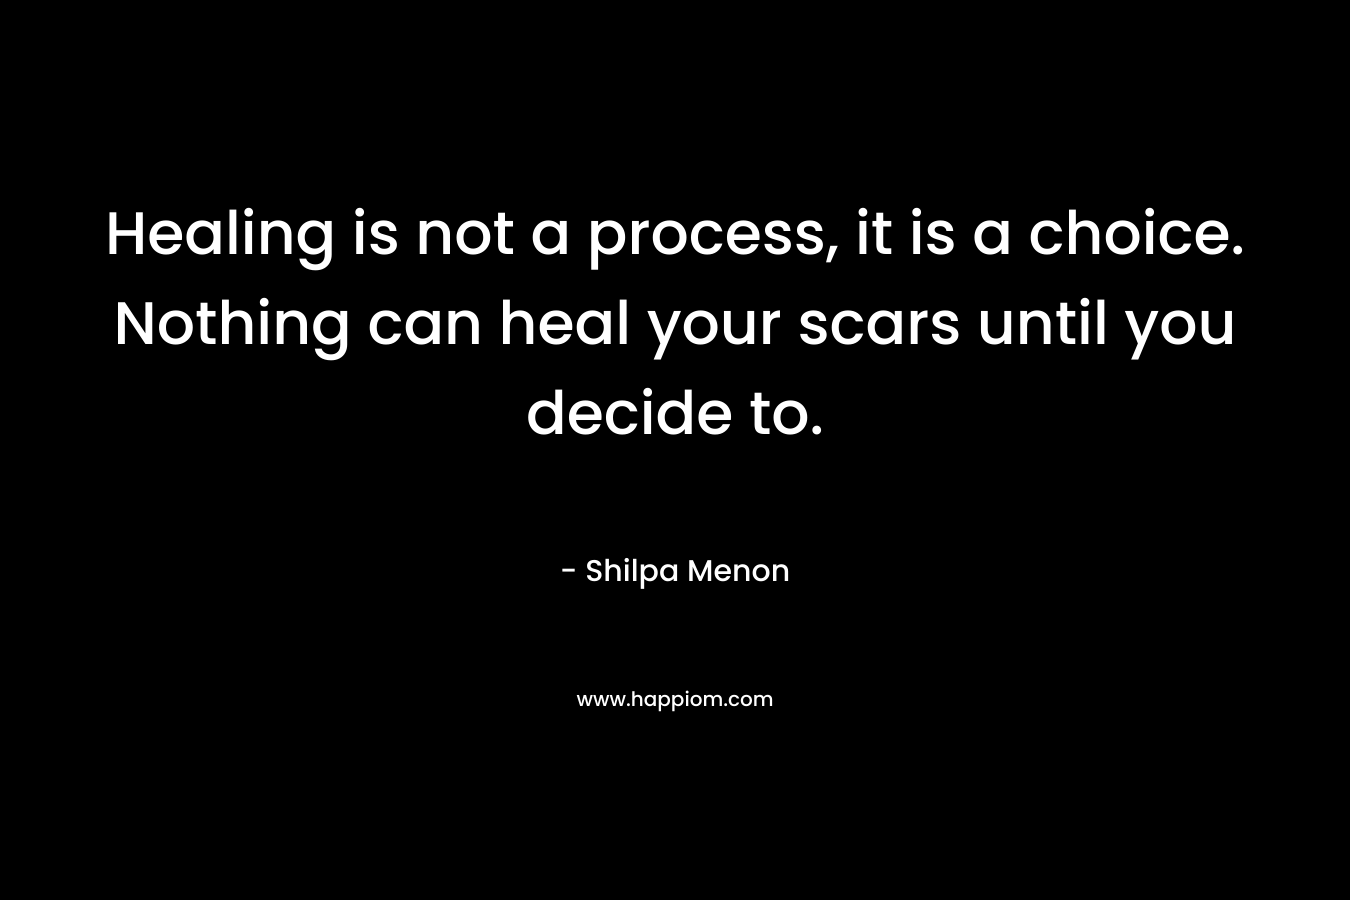 Healing is not a process, it is a choice. Nothing can heal your scars until you decide to. – Shilpa Menon